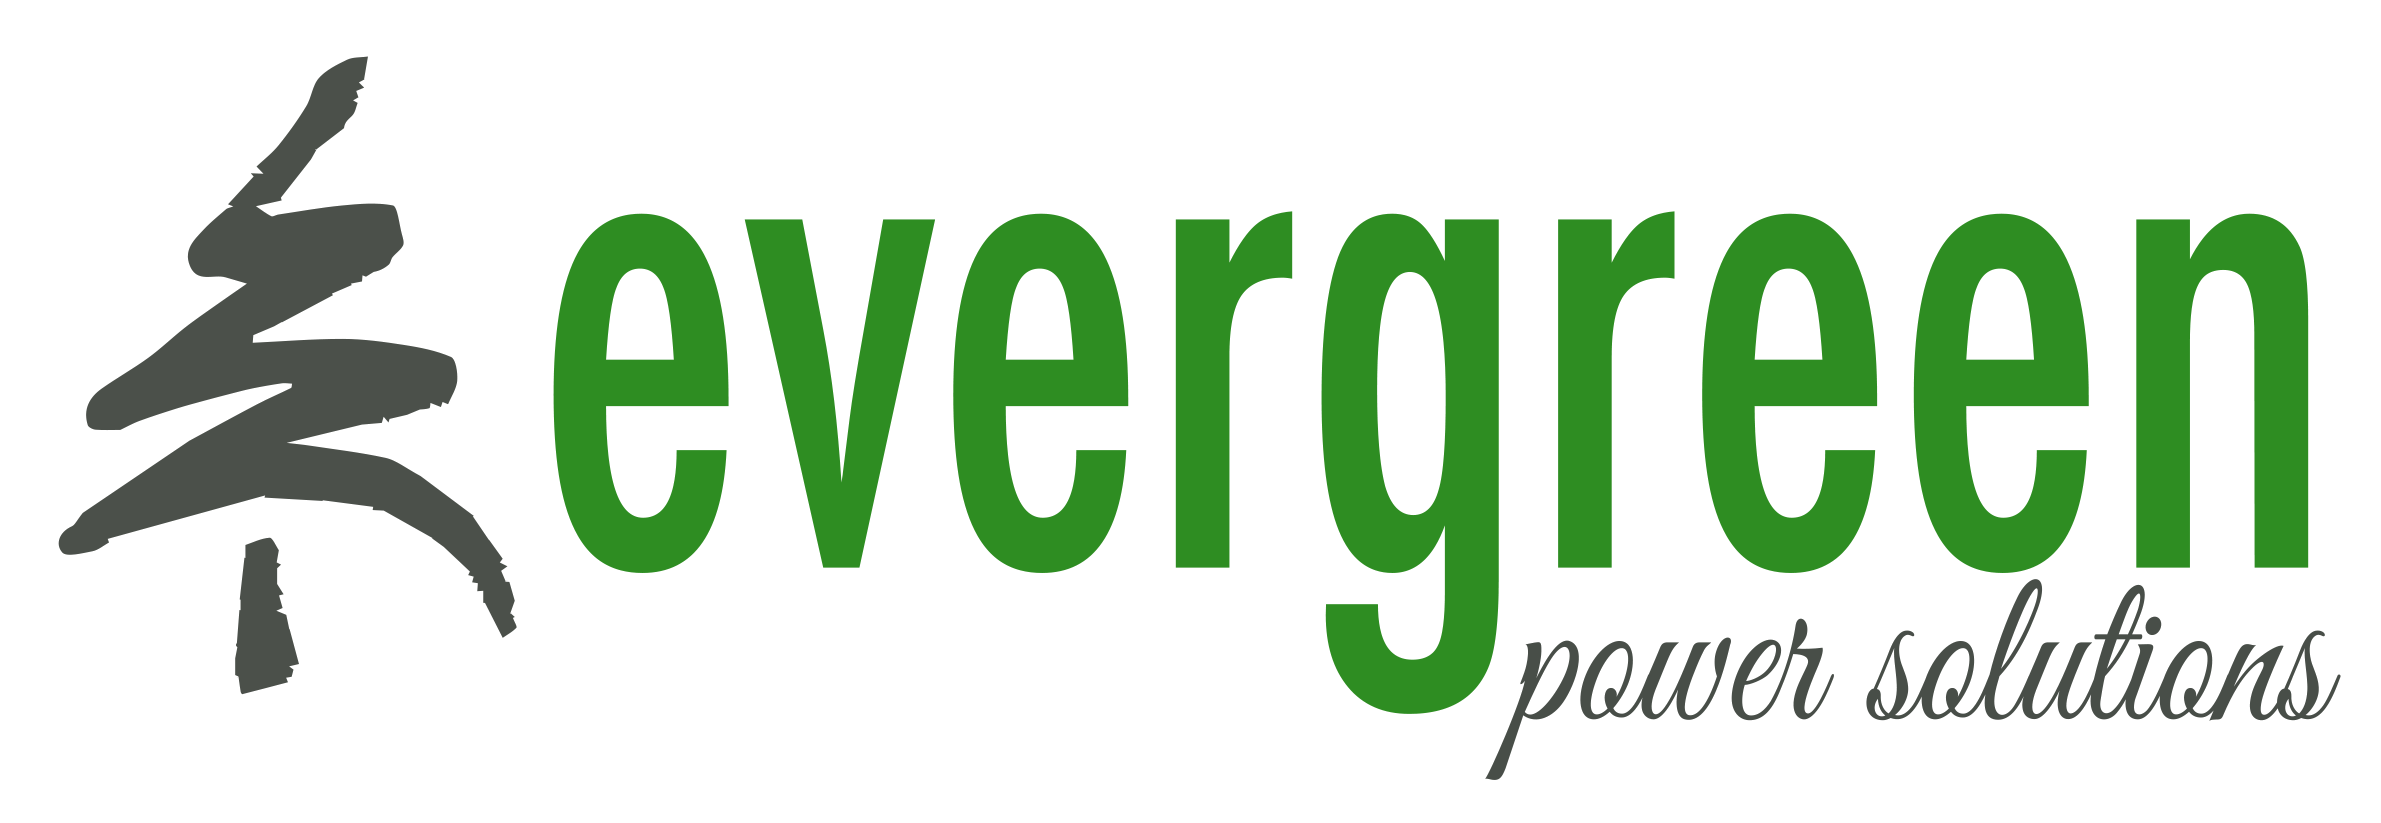 How do I login to Evergreen Power Solutions? | Evergreen Power ...